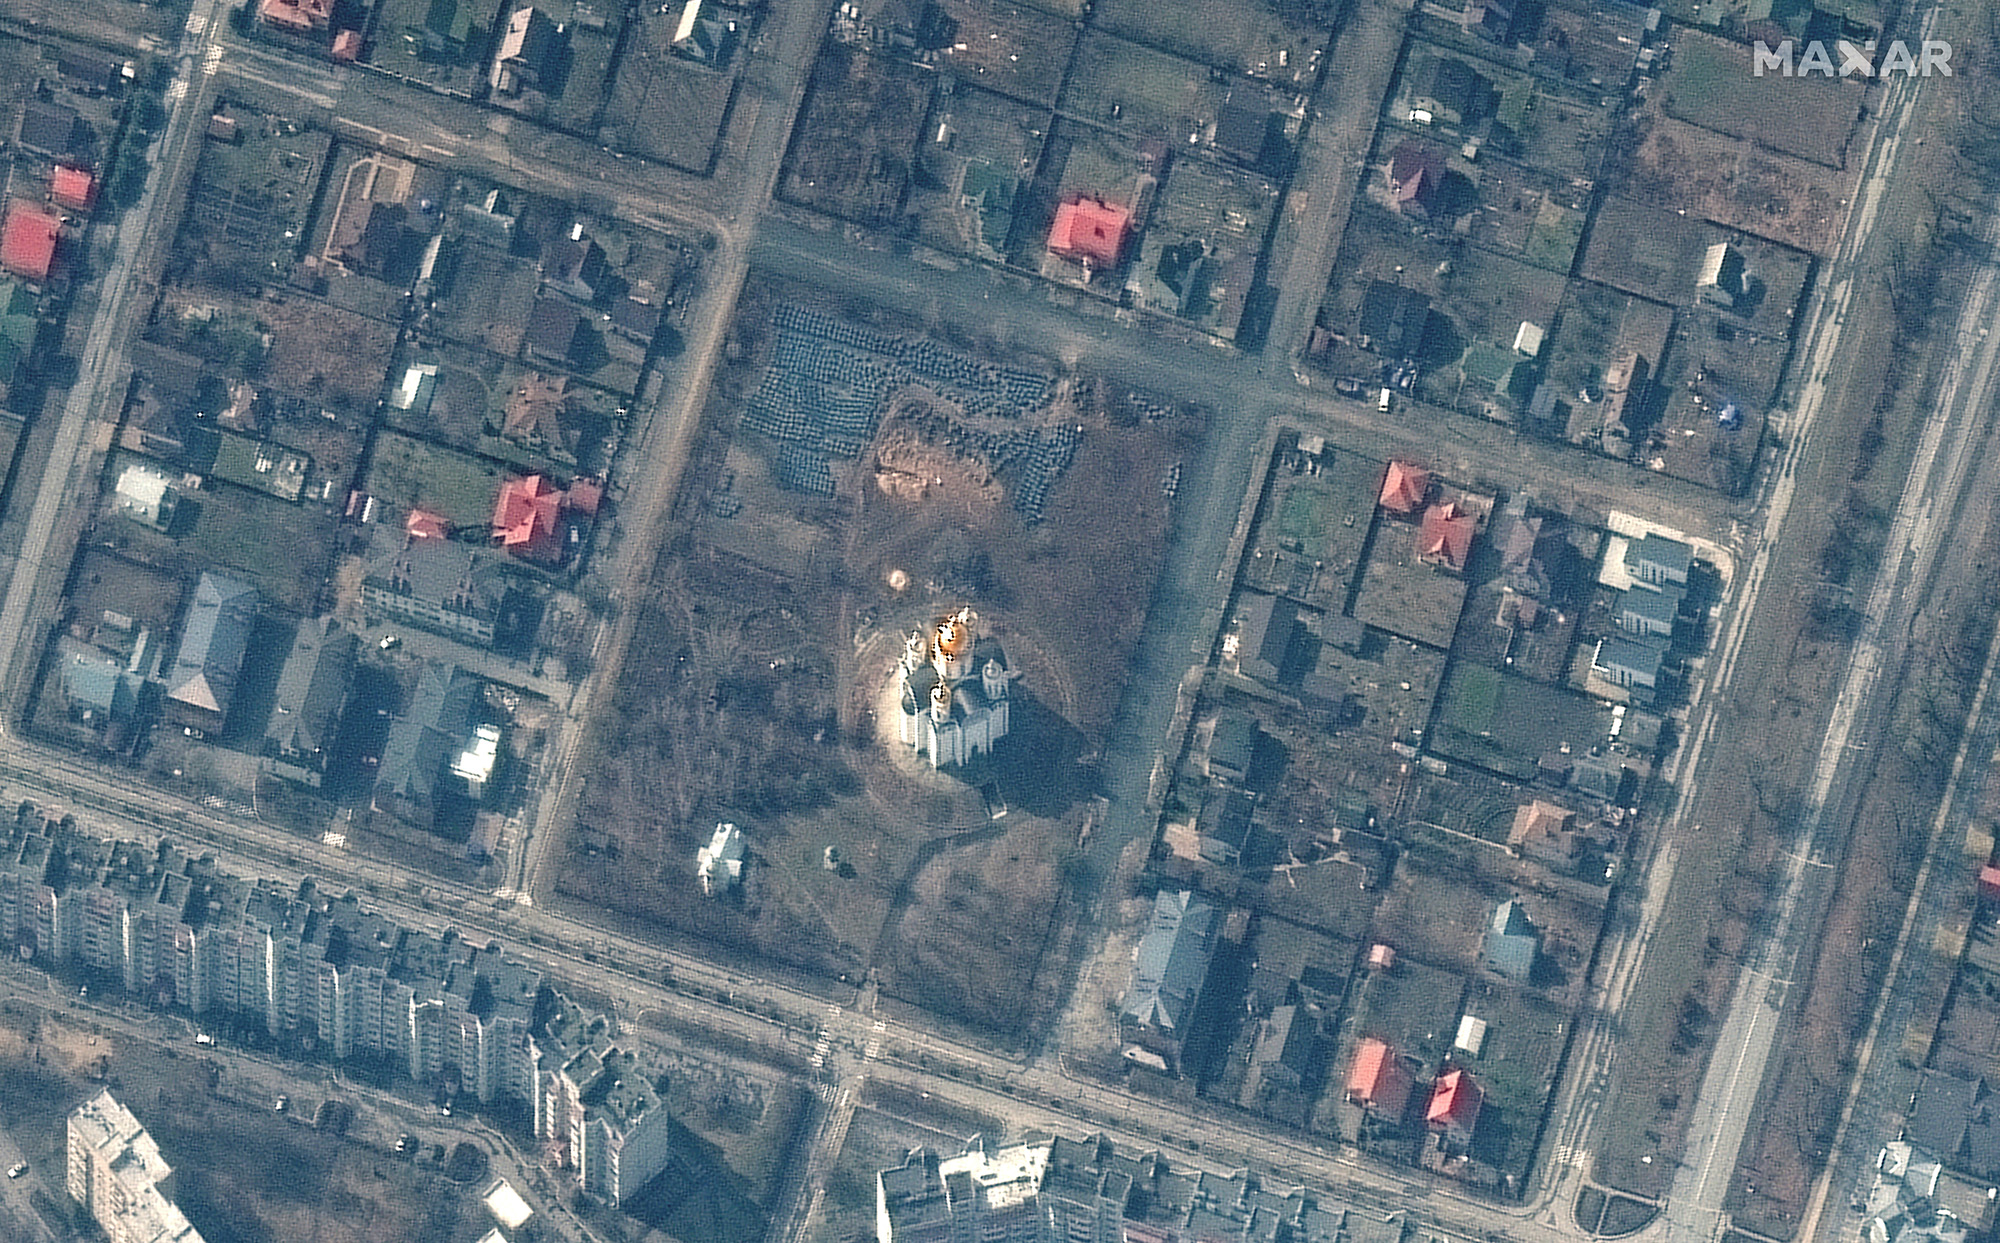 A satellite image shows a grave site with an approximately 45-foot long trench in the southwestern section of the area near the Church of St. Andrew and Pyervozvannoho All Saints, in Bucha, Ukraine, on March 31.